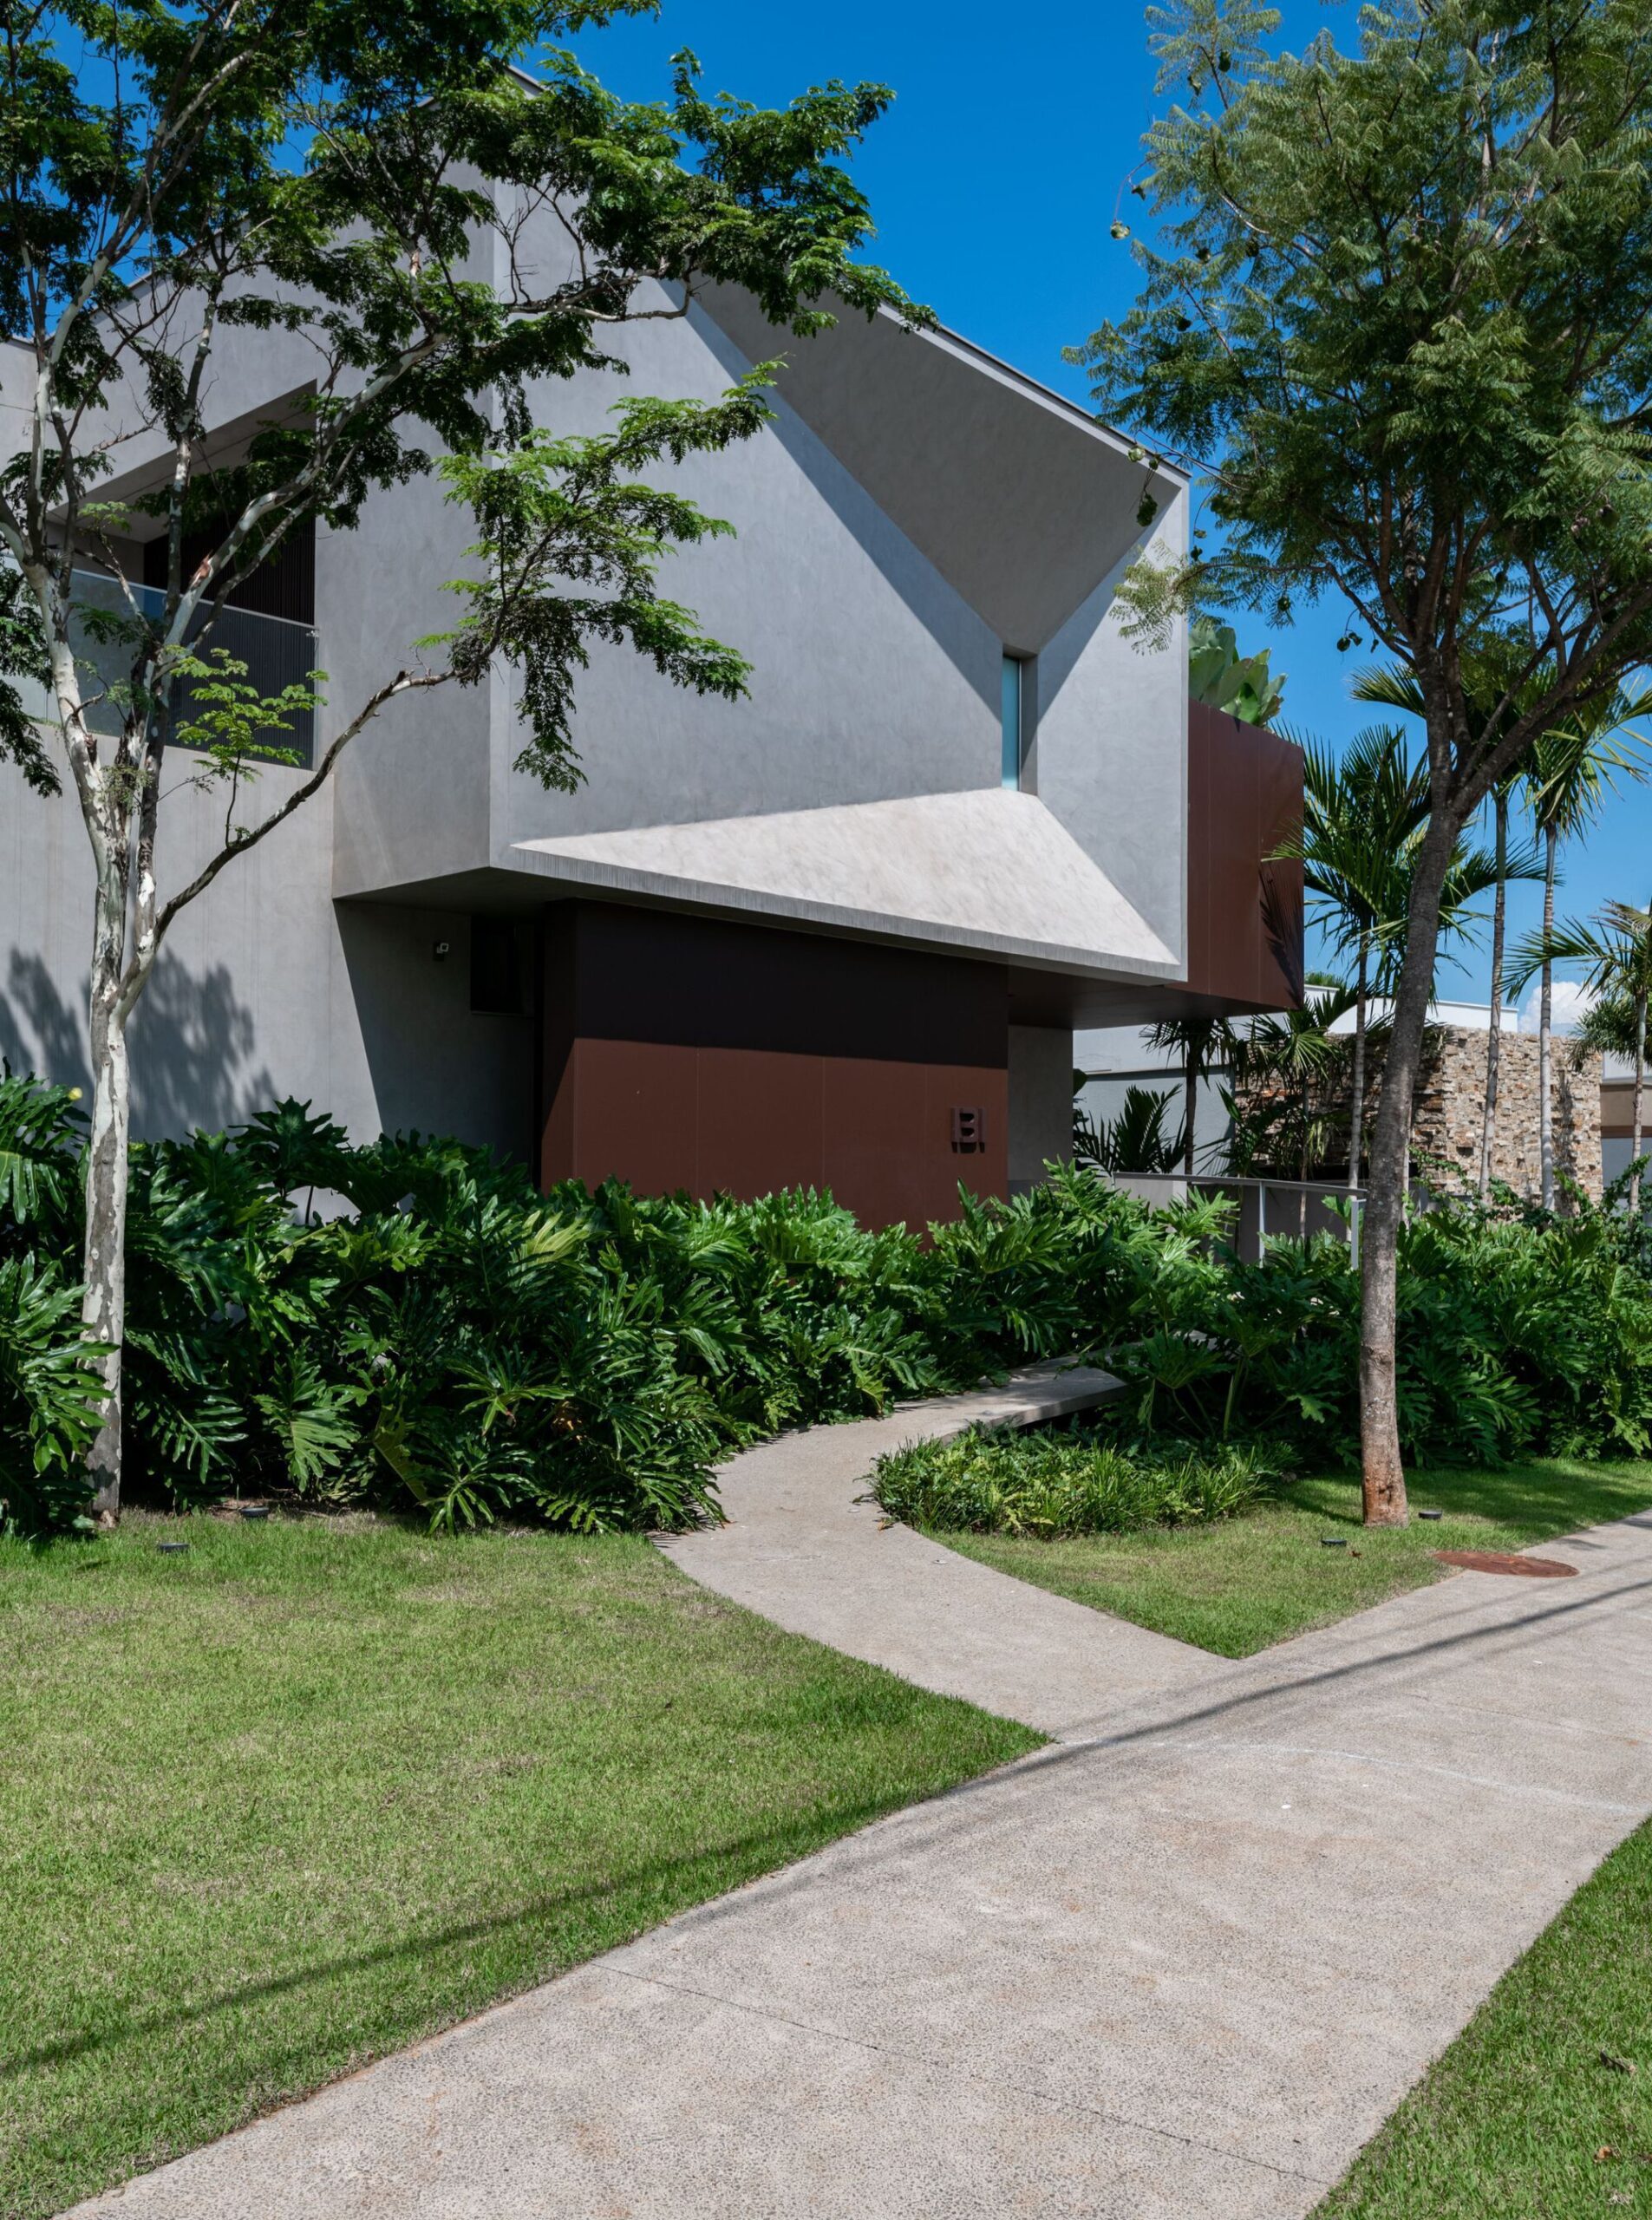 House H.L, a Contemporary Open Home by Celso Laetano Arquitetura